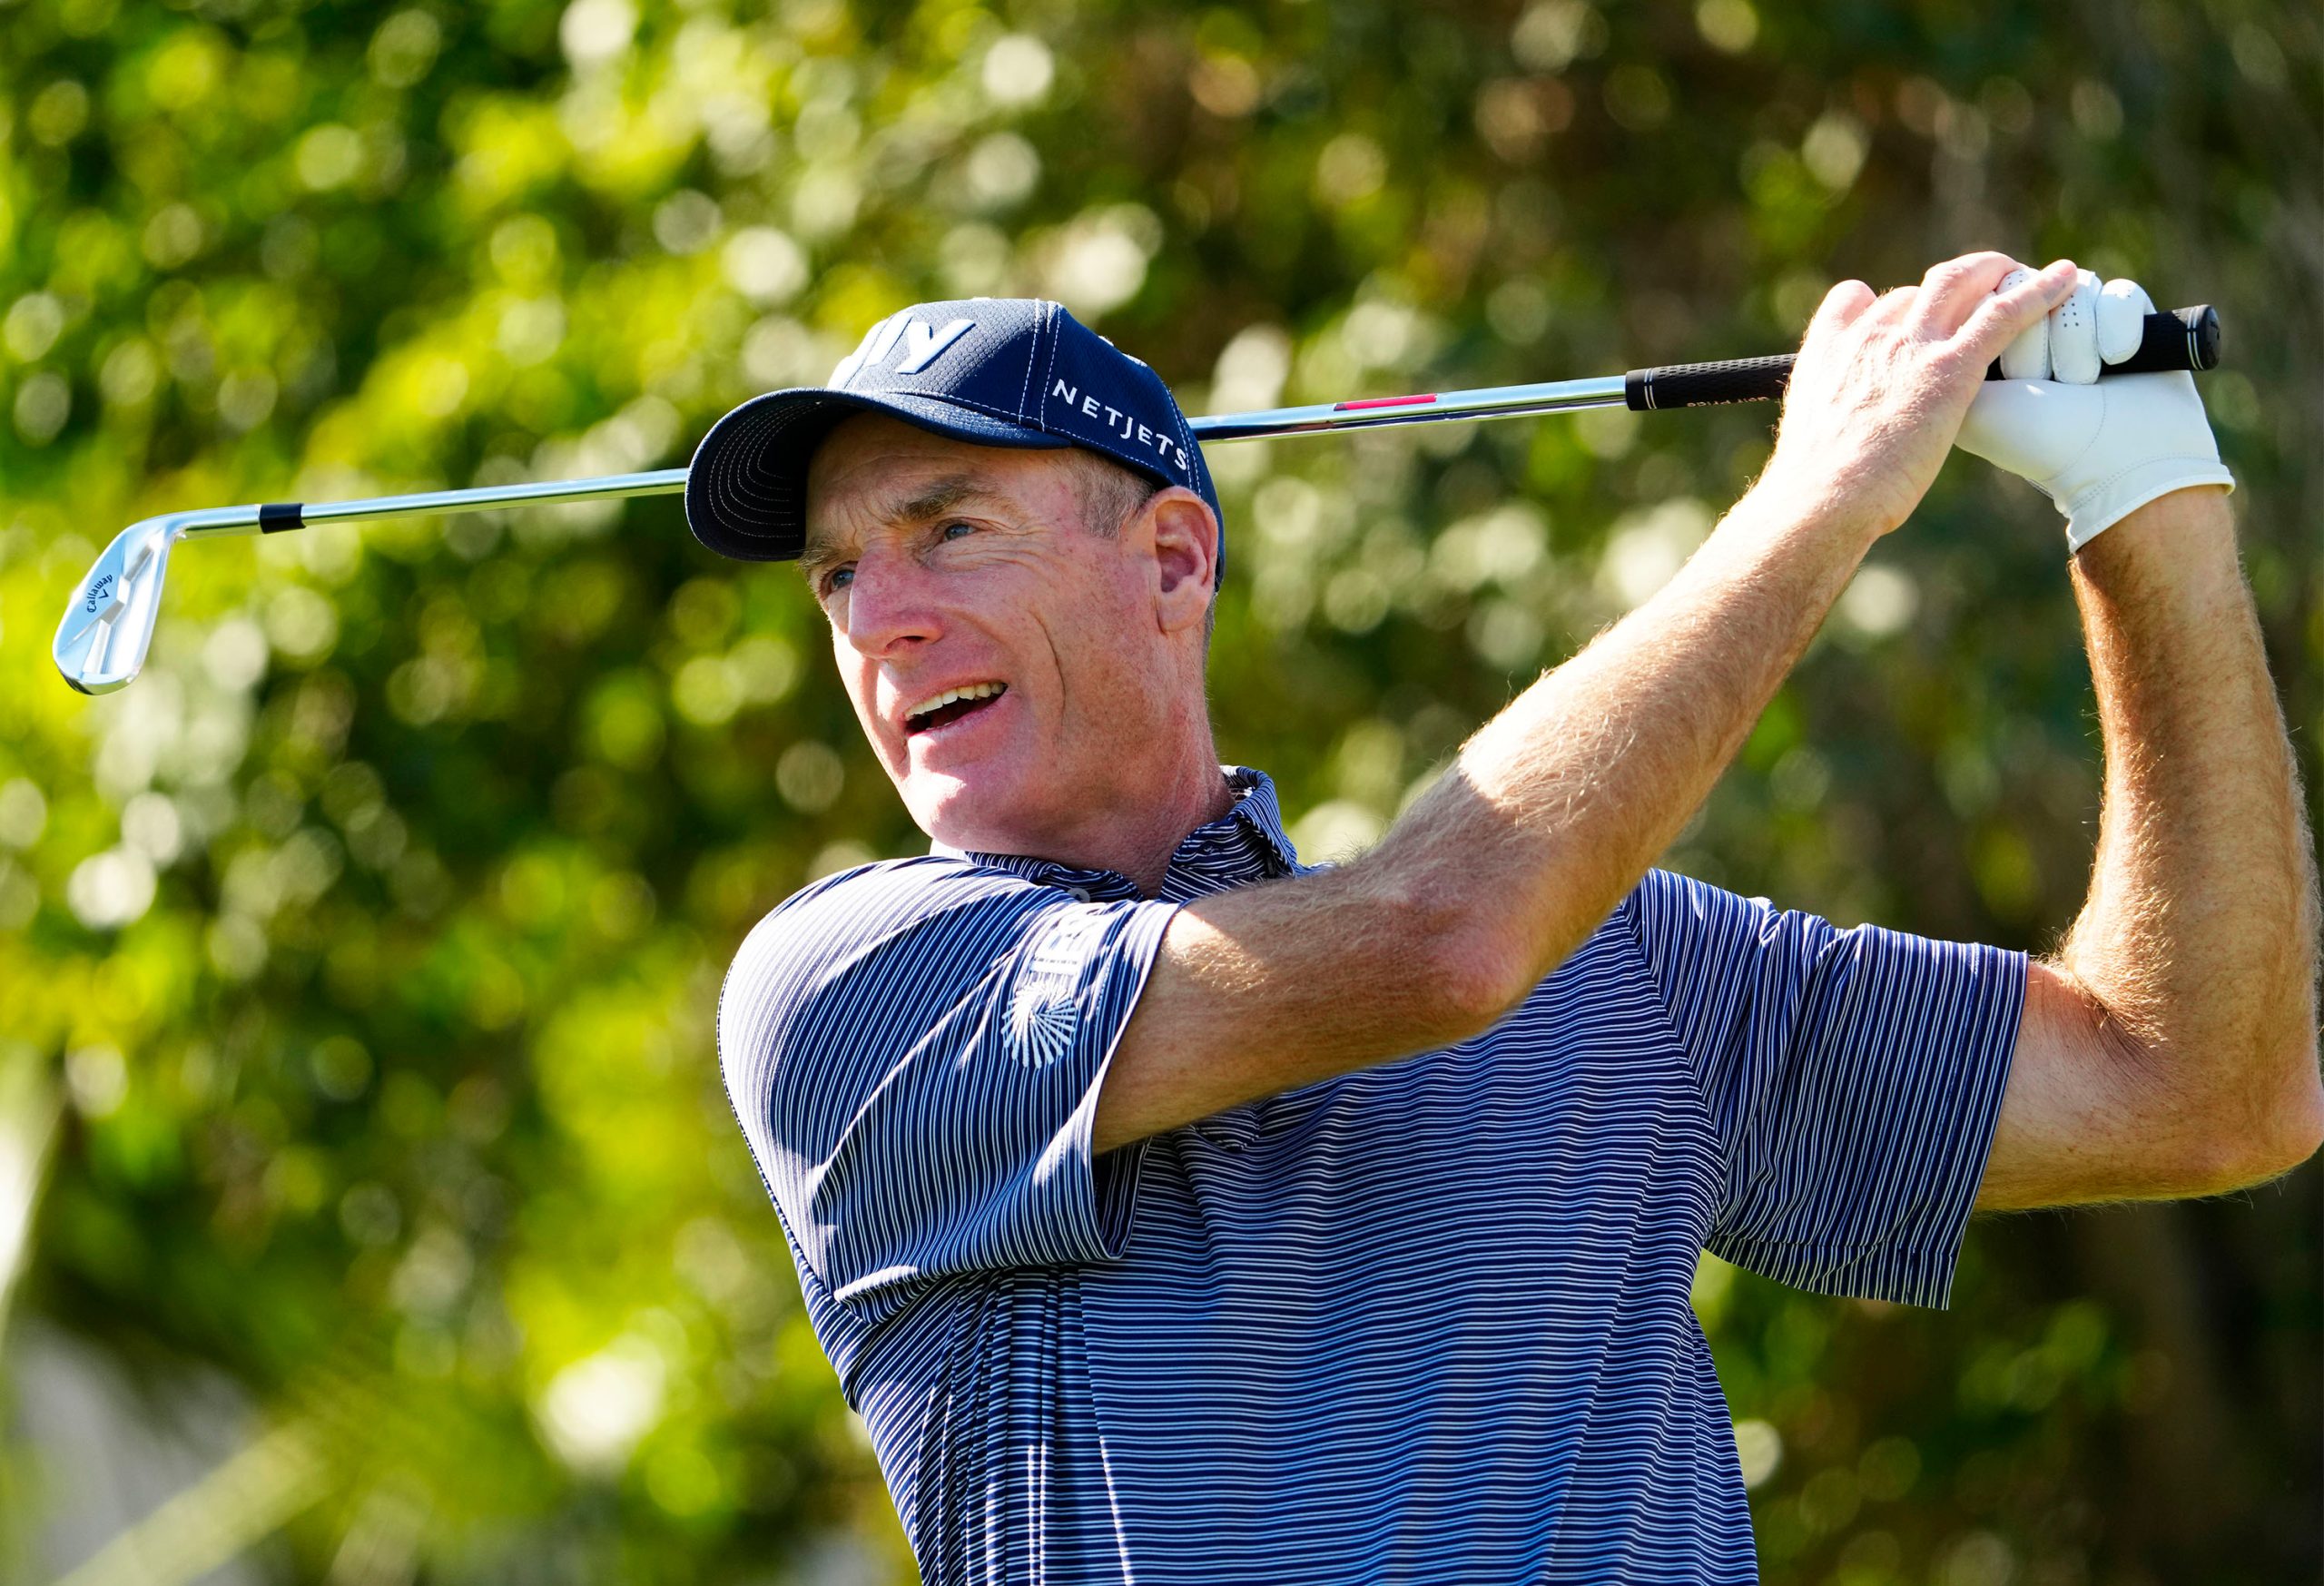 Jim Furyk on World Golf Hall of Fame consideration: ‘I was flattered when people first asked me’